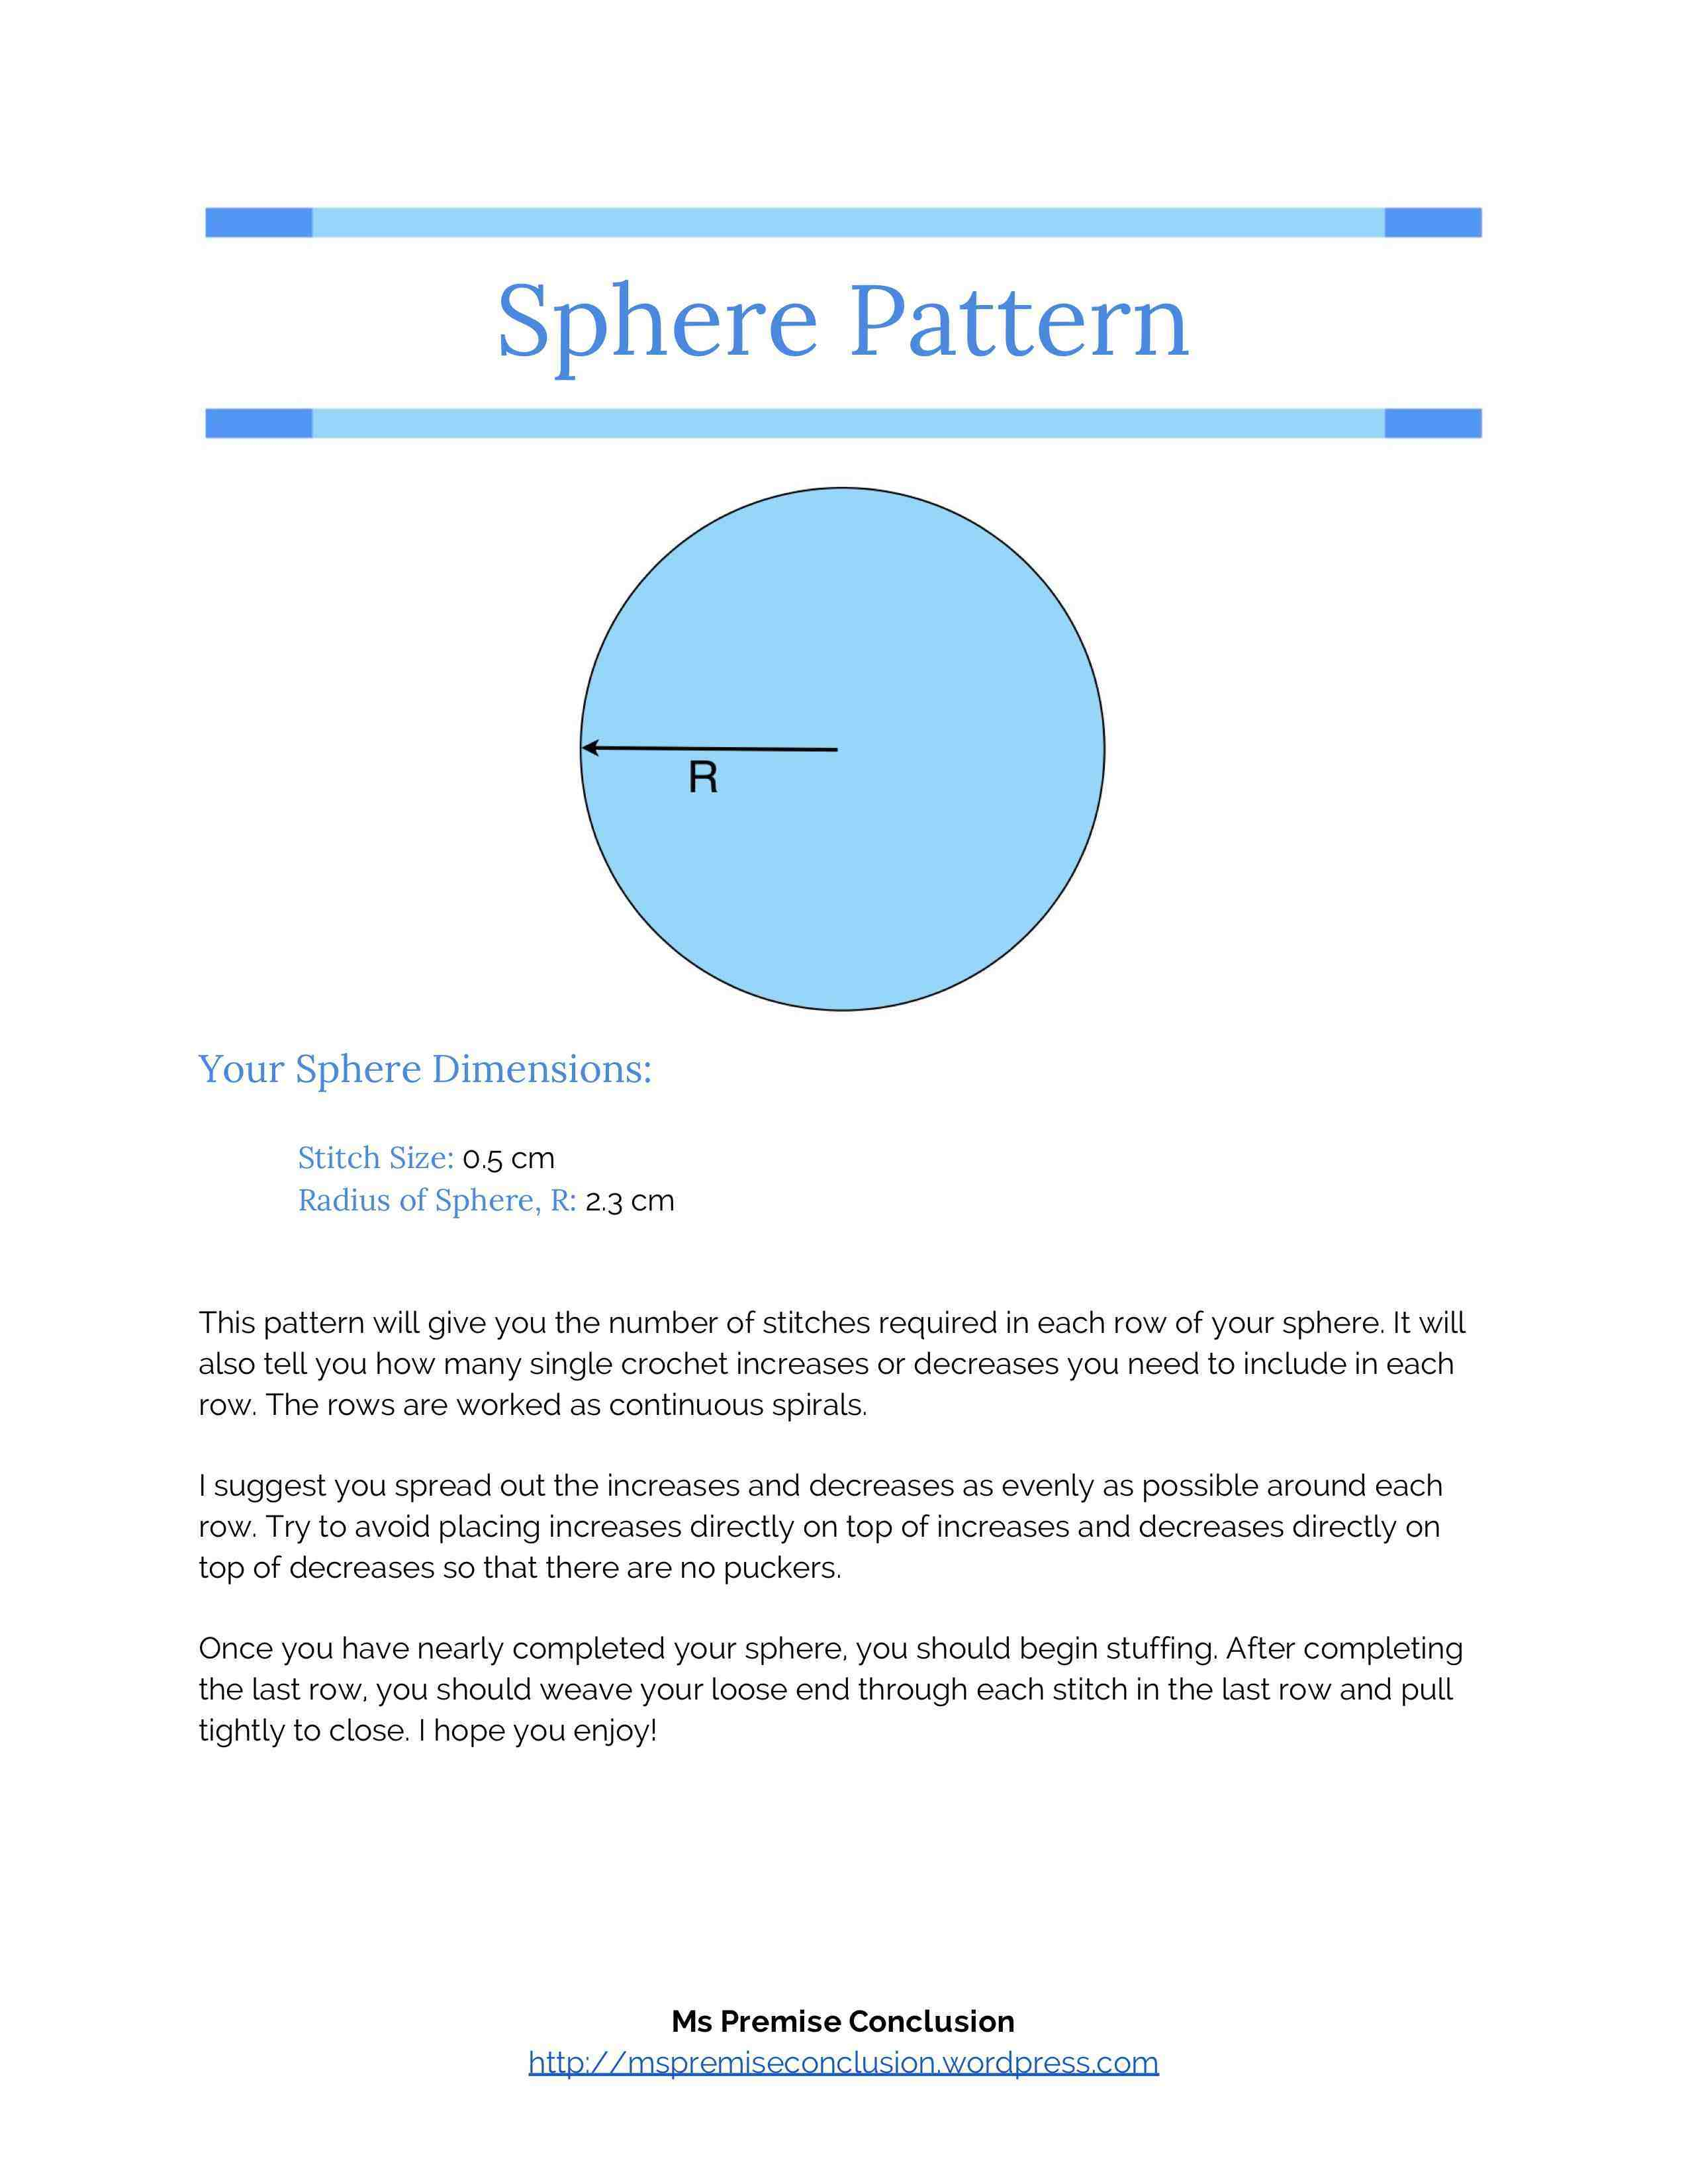 Crochet Pattern Generator Inspiration And A Personalized Sphere Ms Premise Conclusion